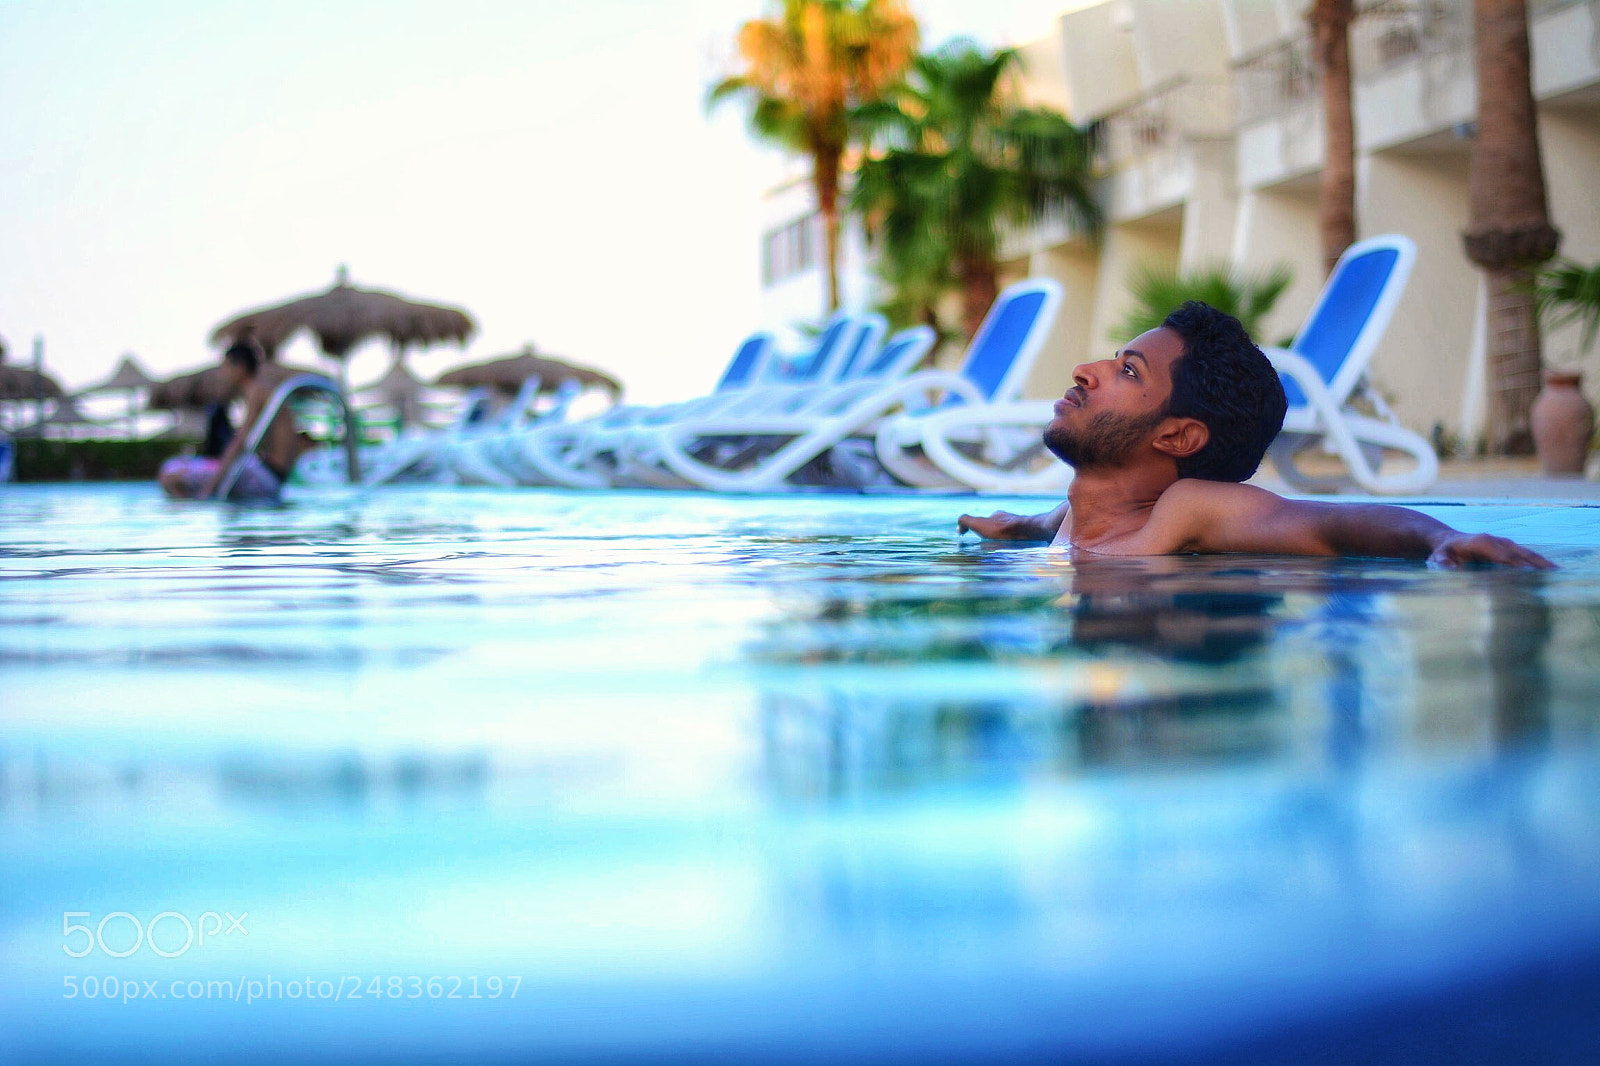 Nikon D7100 sample photo. Some of relaxation, hurghada photography